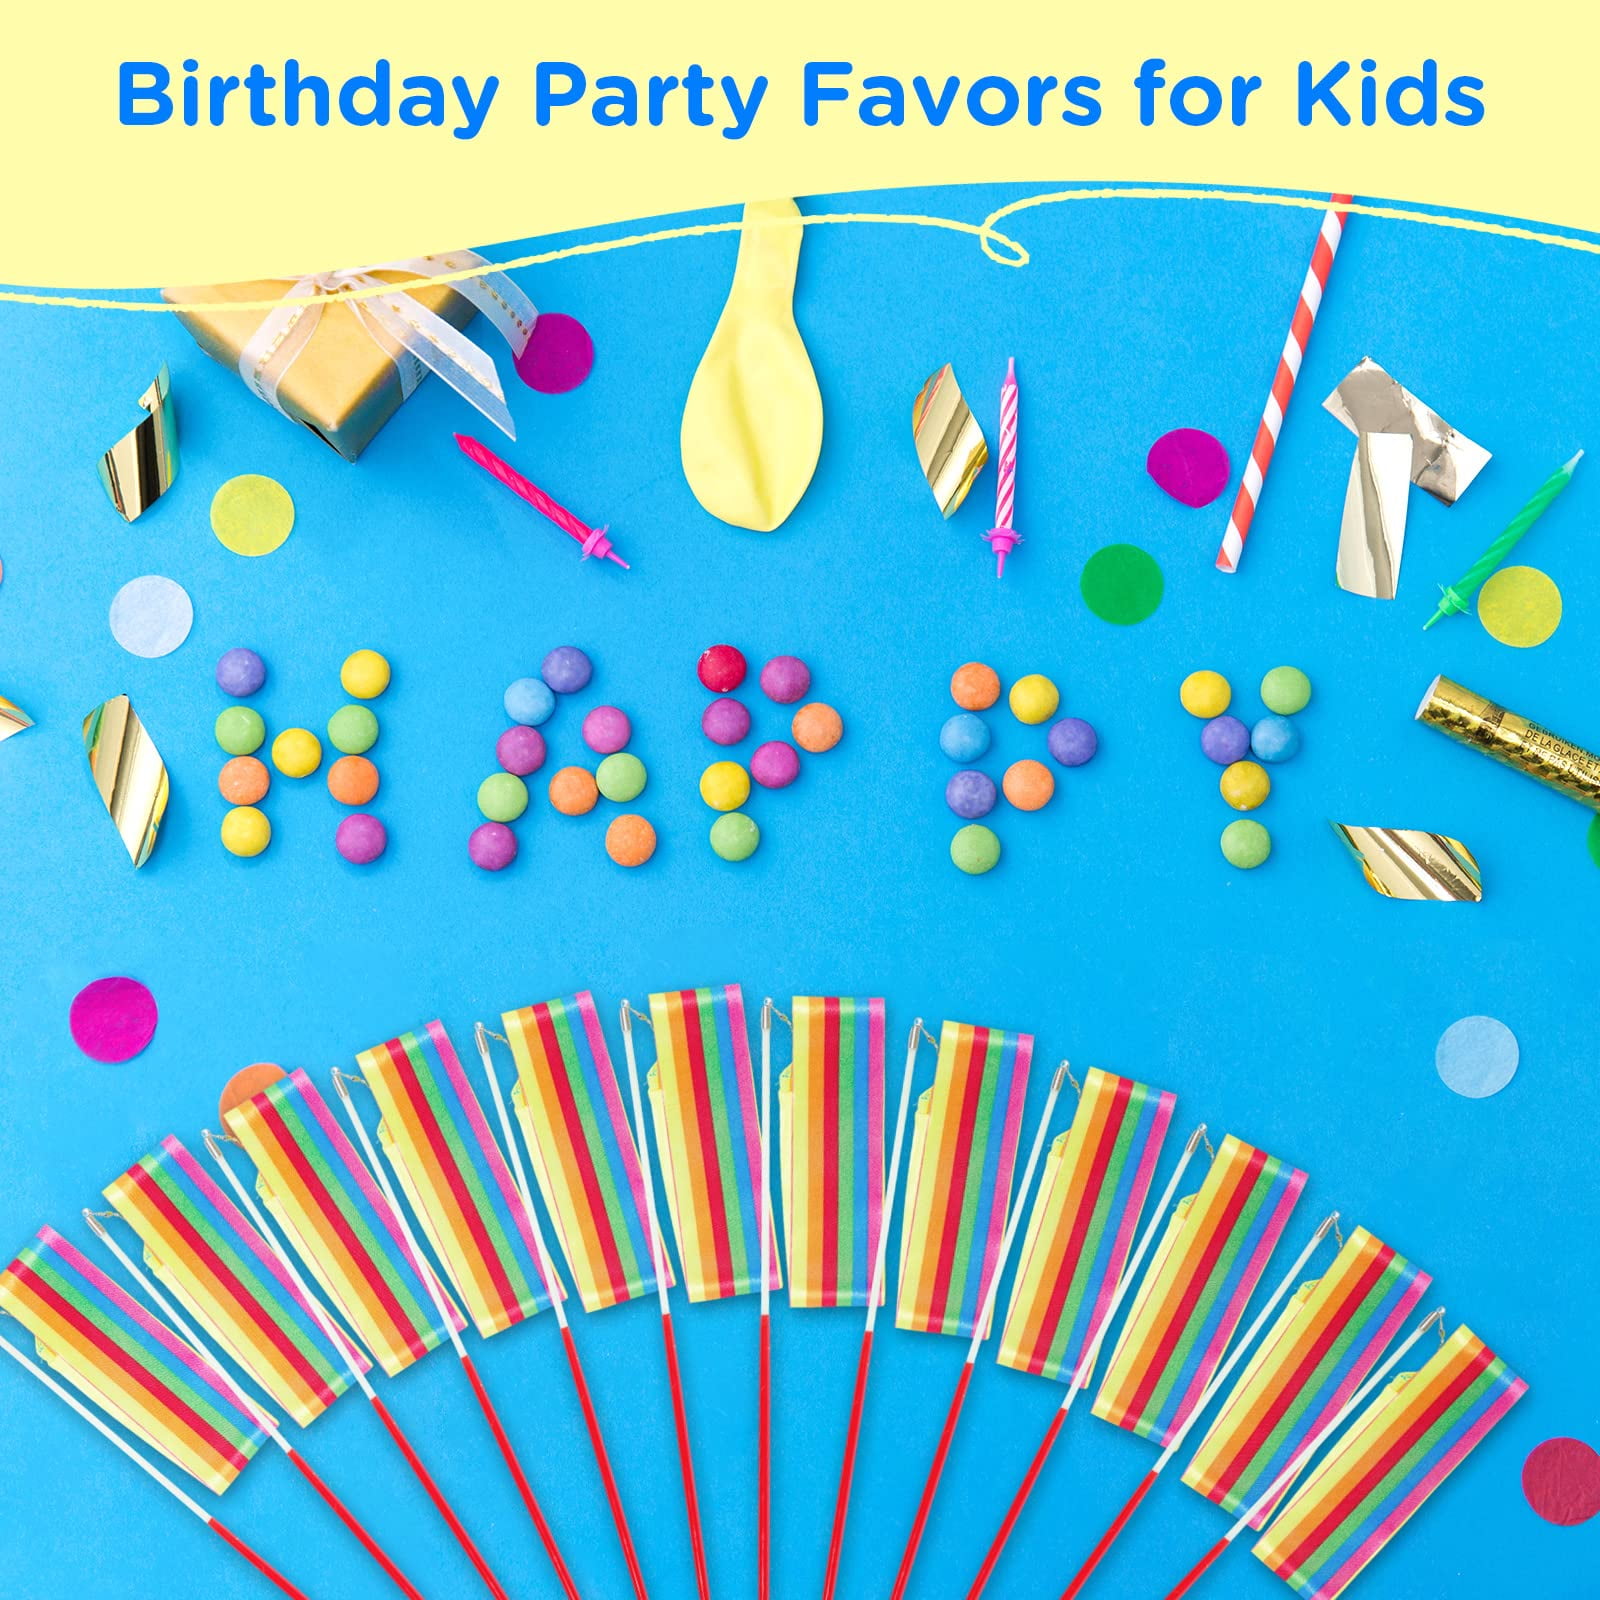 Party Flags for outside Party Favors for Kids 8-12 Goodie Bags Girl Sequin  Tablecloth 23.6 